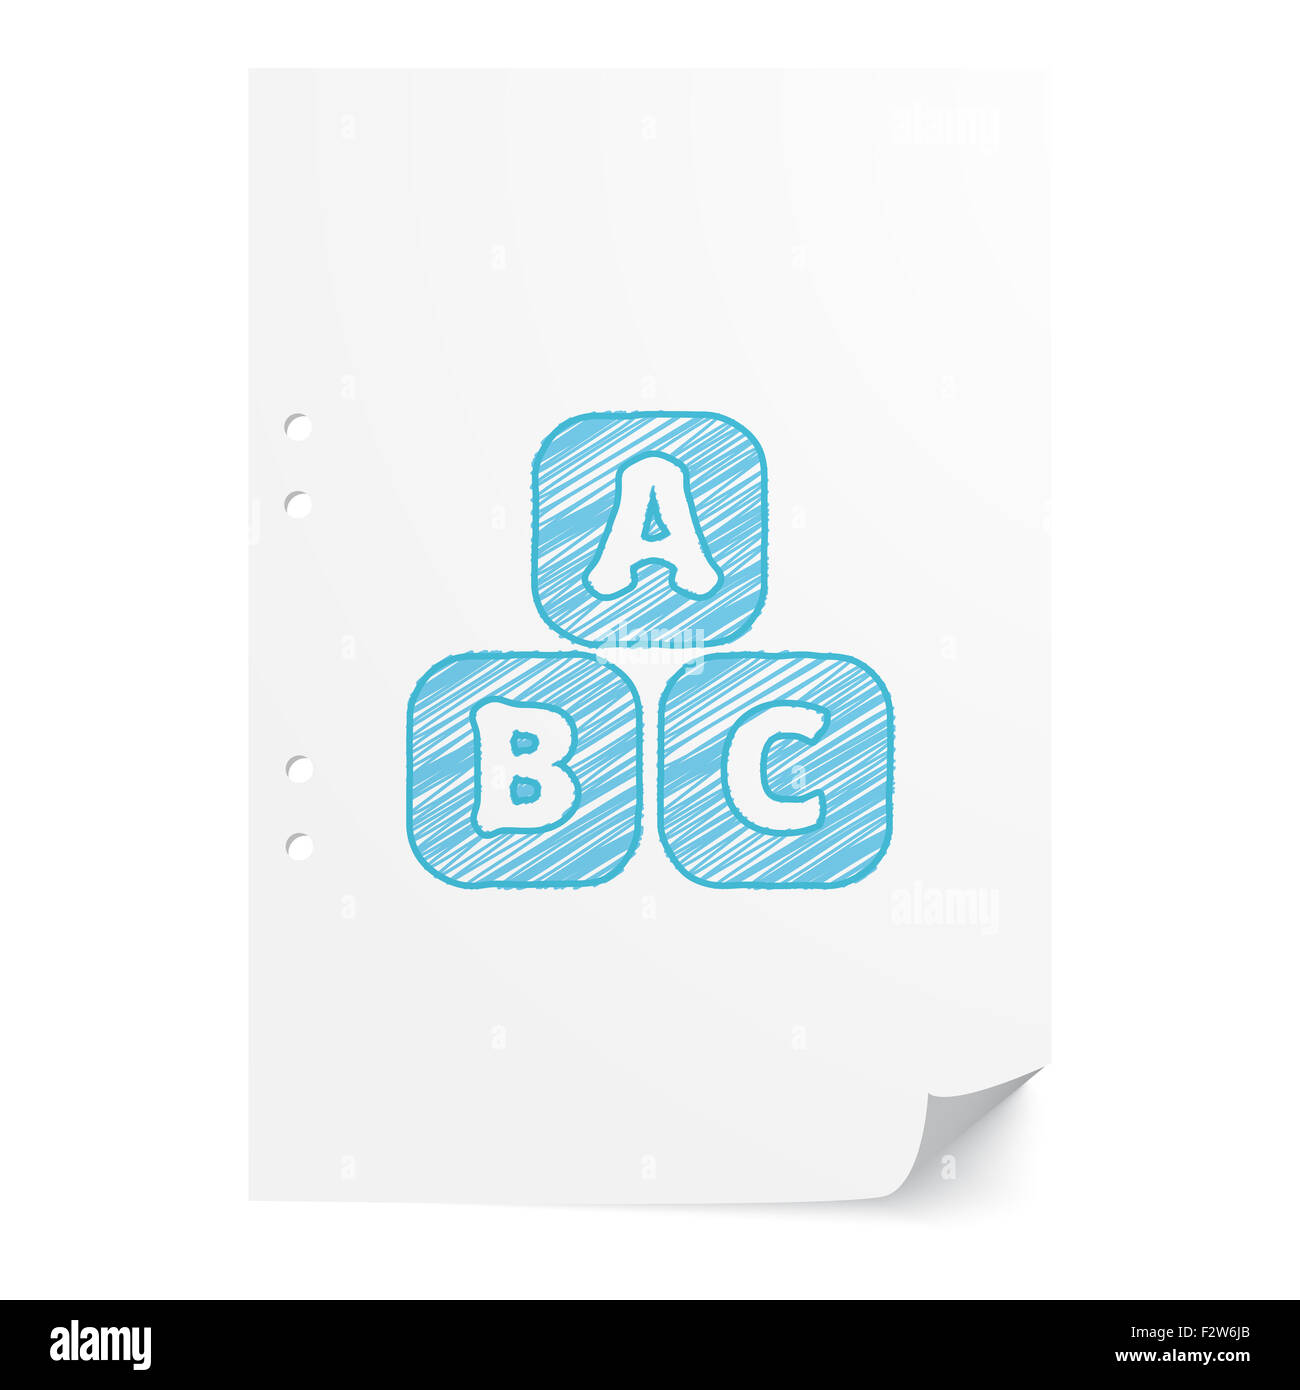 Blue handdrawn Abc Blocks illustration on white paper sheet with copy space Stock Photo